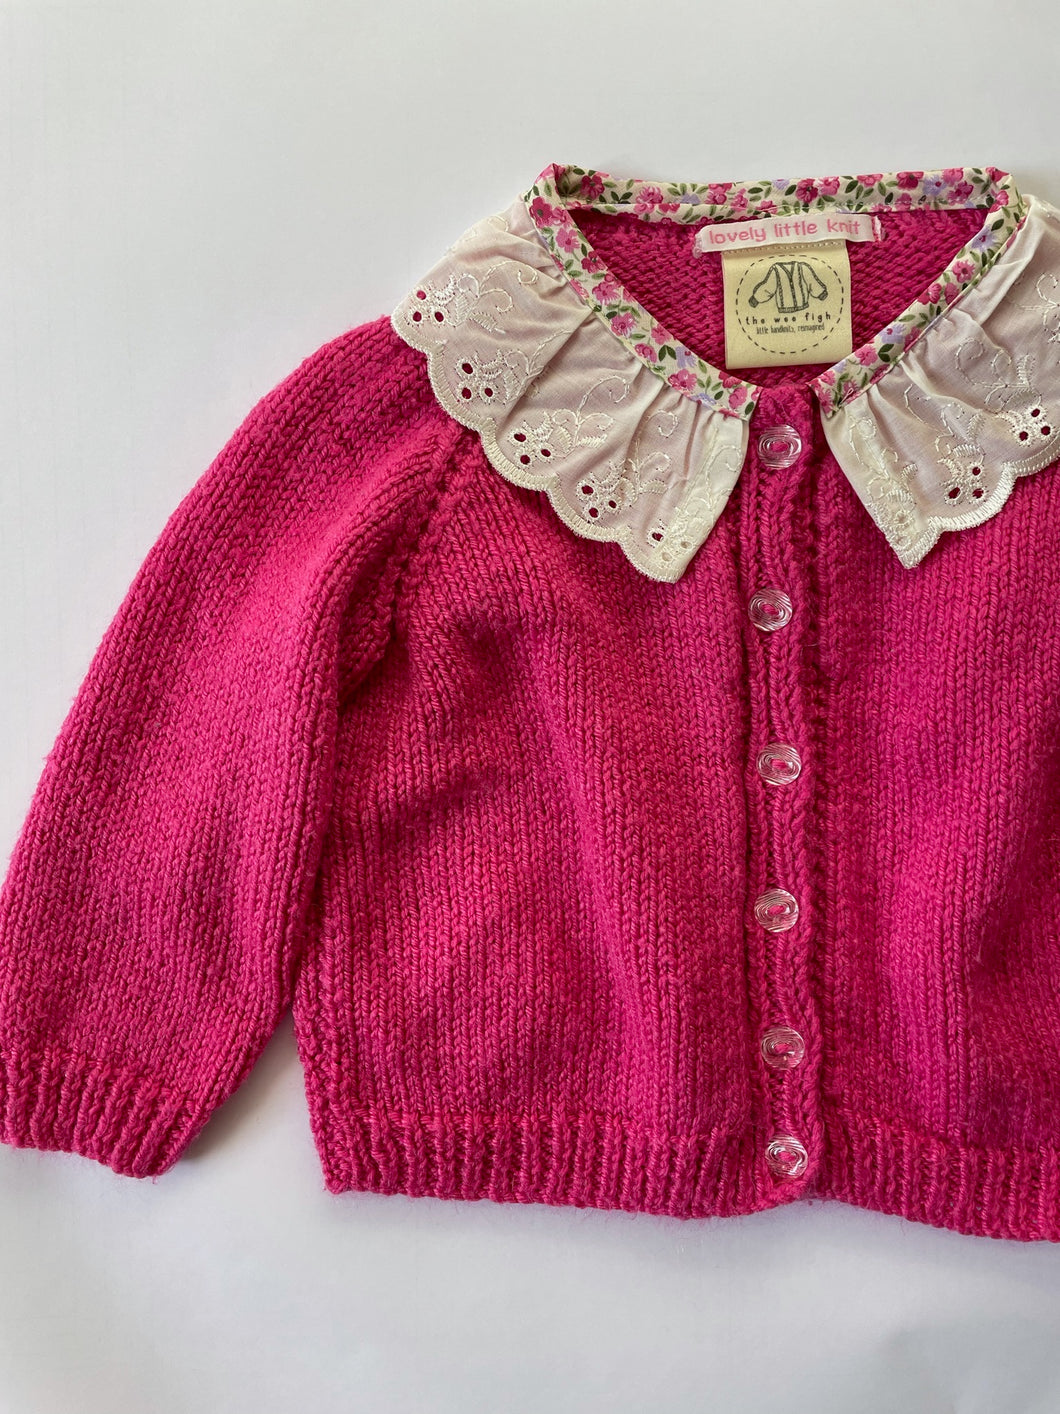 06-12 months - Pink frilly cardigan